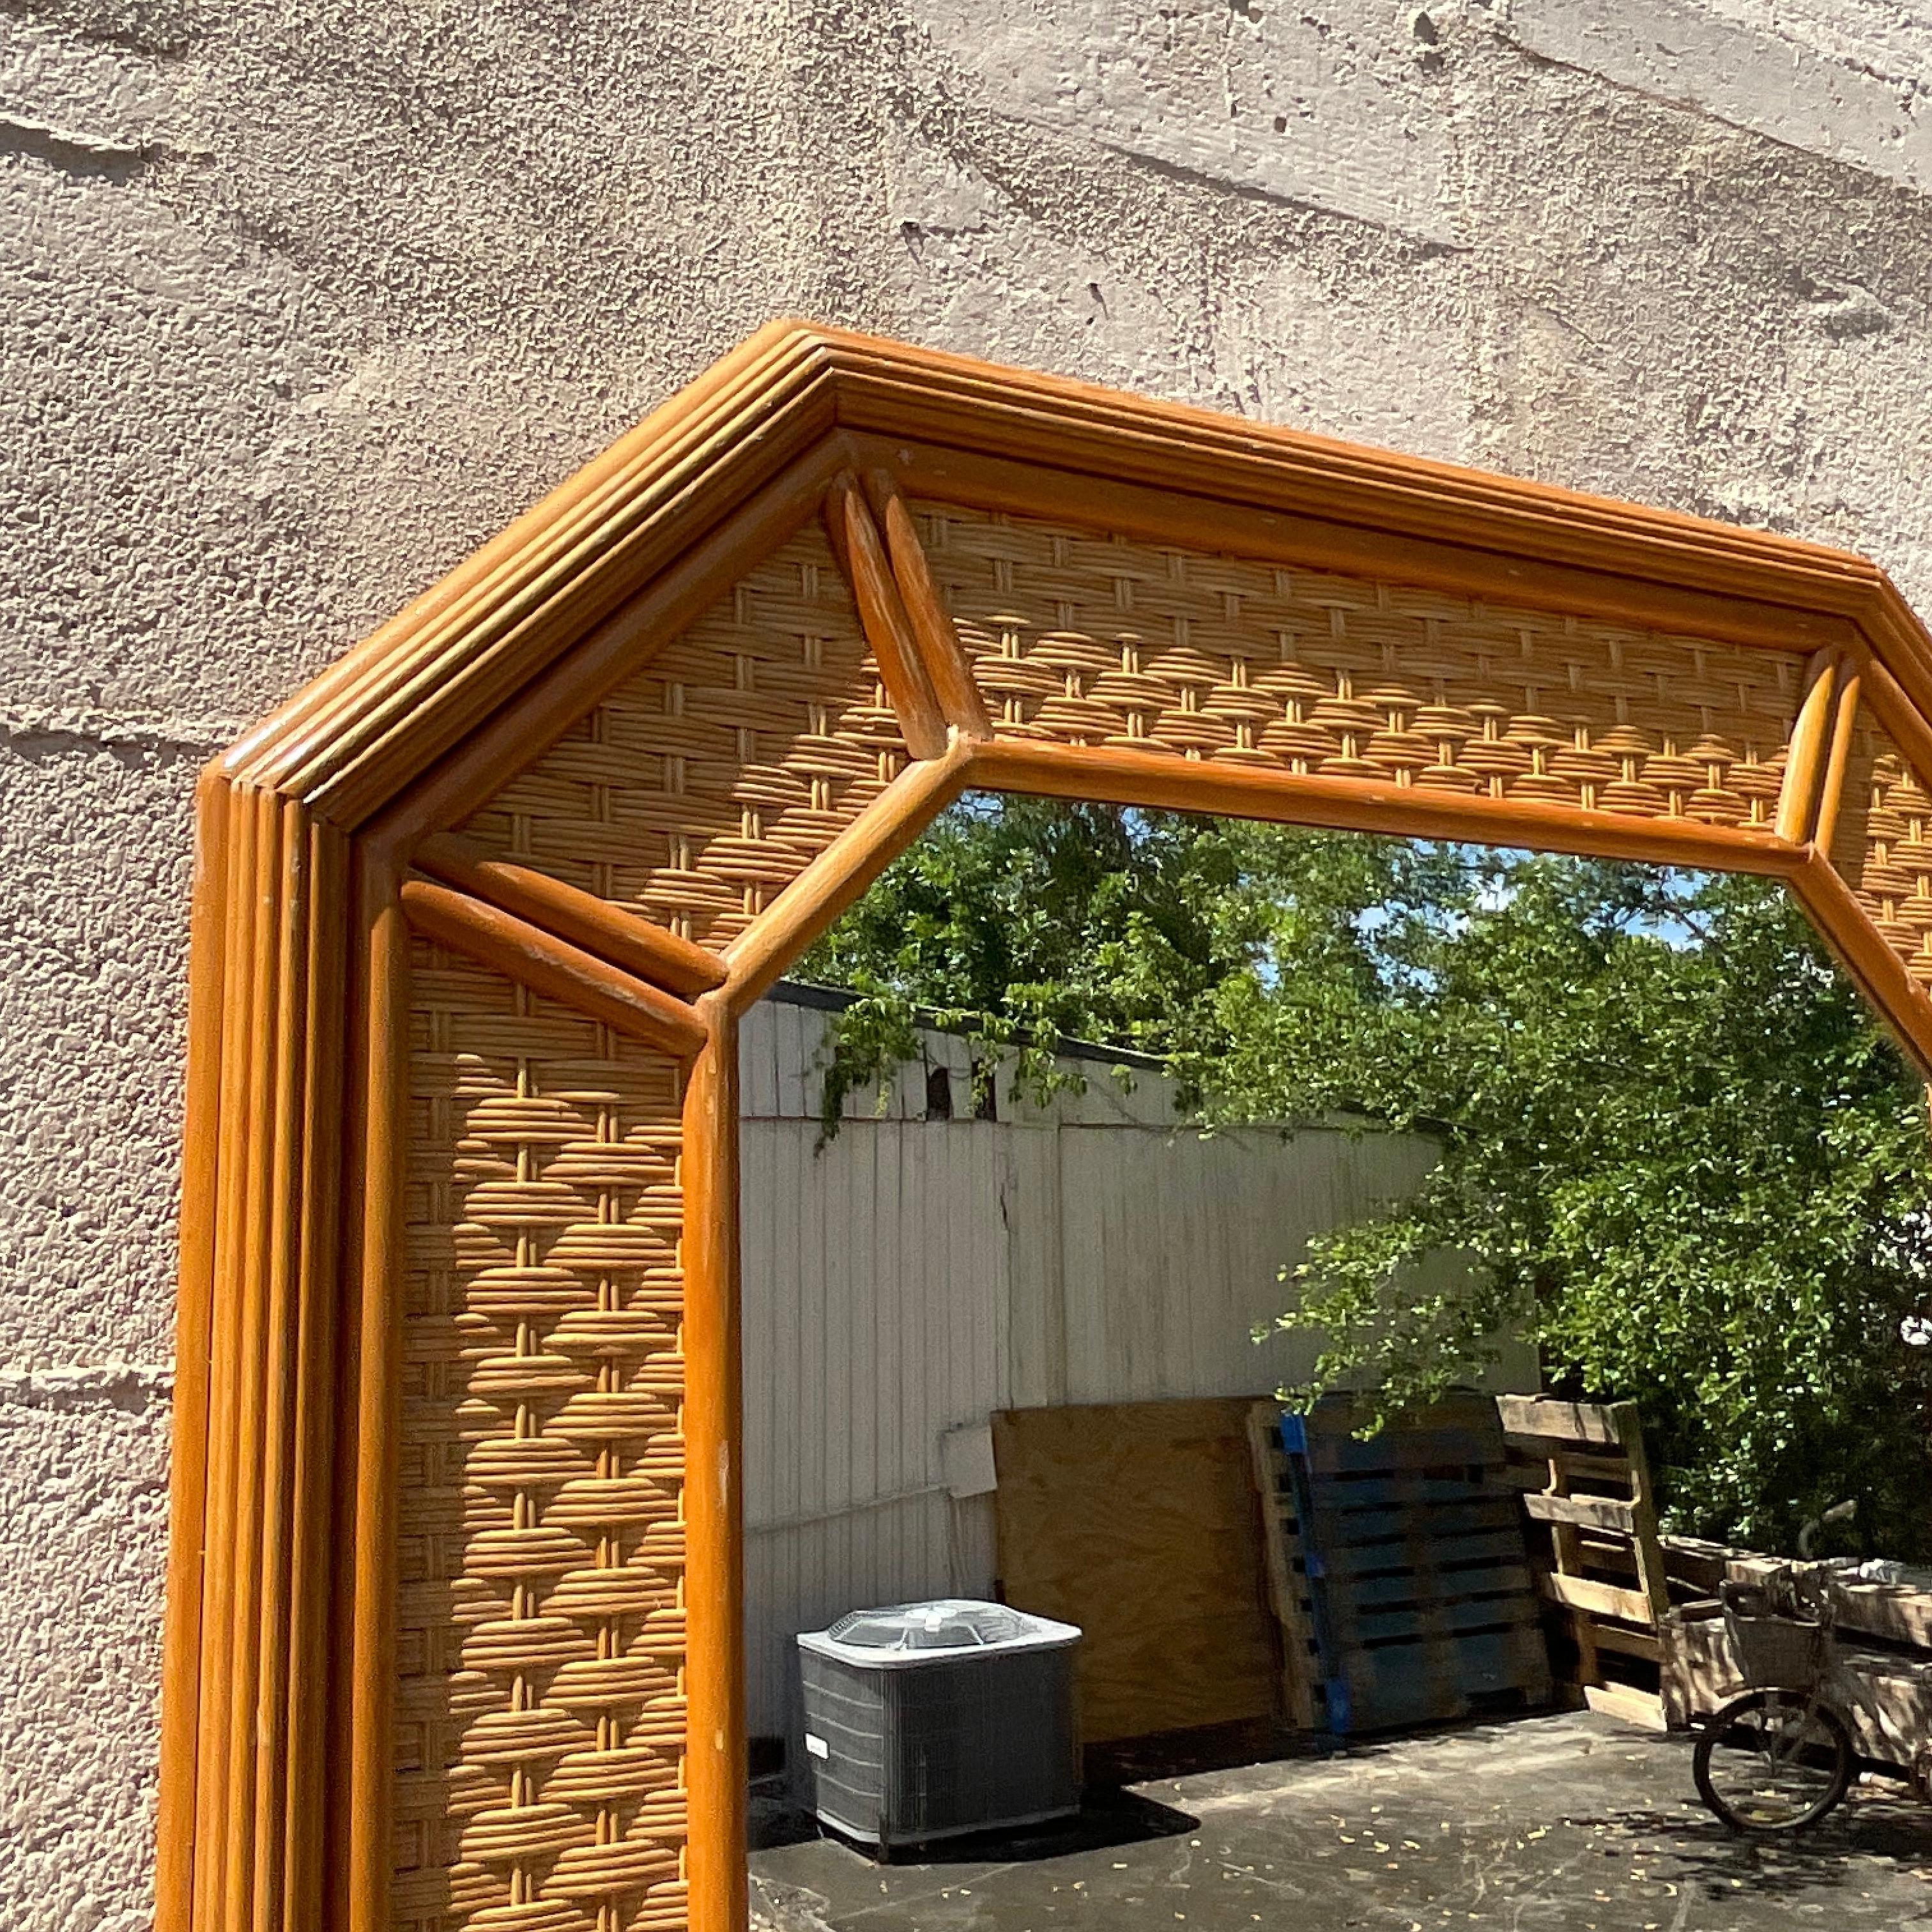 Embrace coastal elegance with our Vintage Coastal Rattan Octagon Mirror. American-crafted with a distinctive octagon shape and natural rattan, this mirror captures seaside charm, blending classic design with relaxed coastal vibes for a refreshing